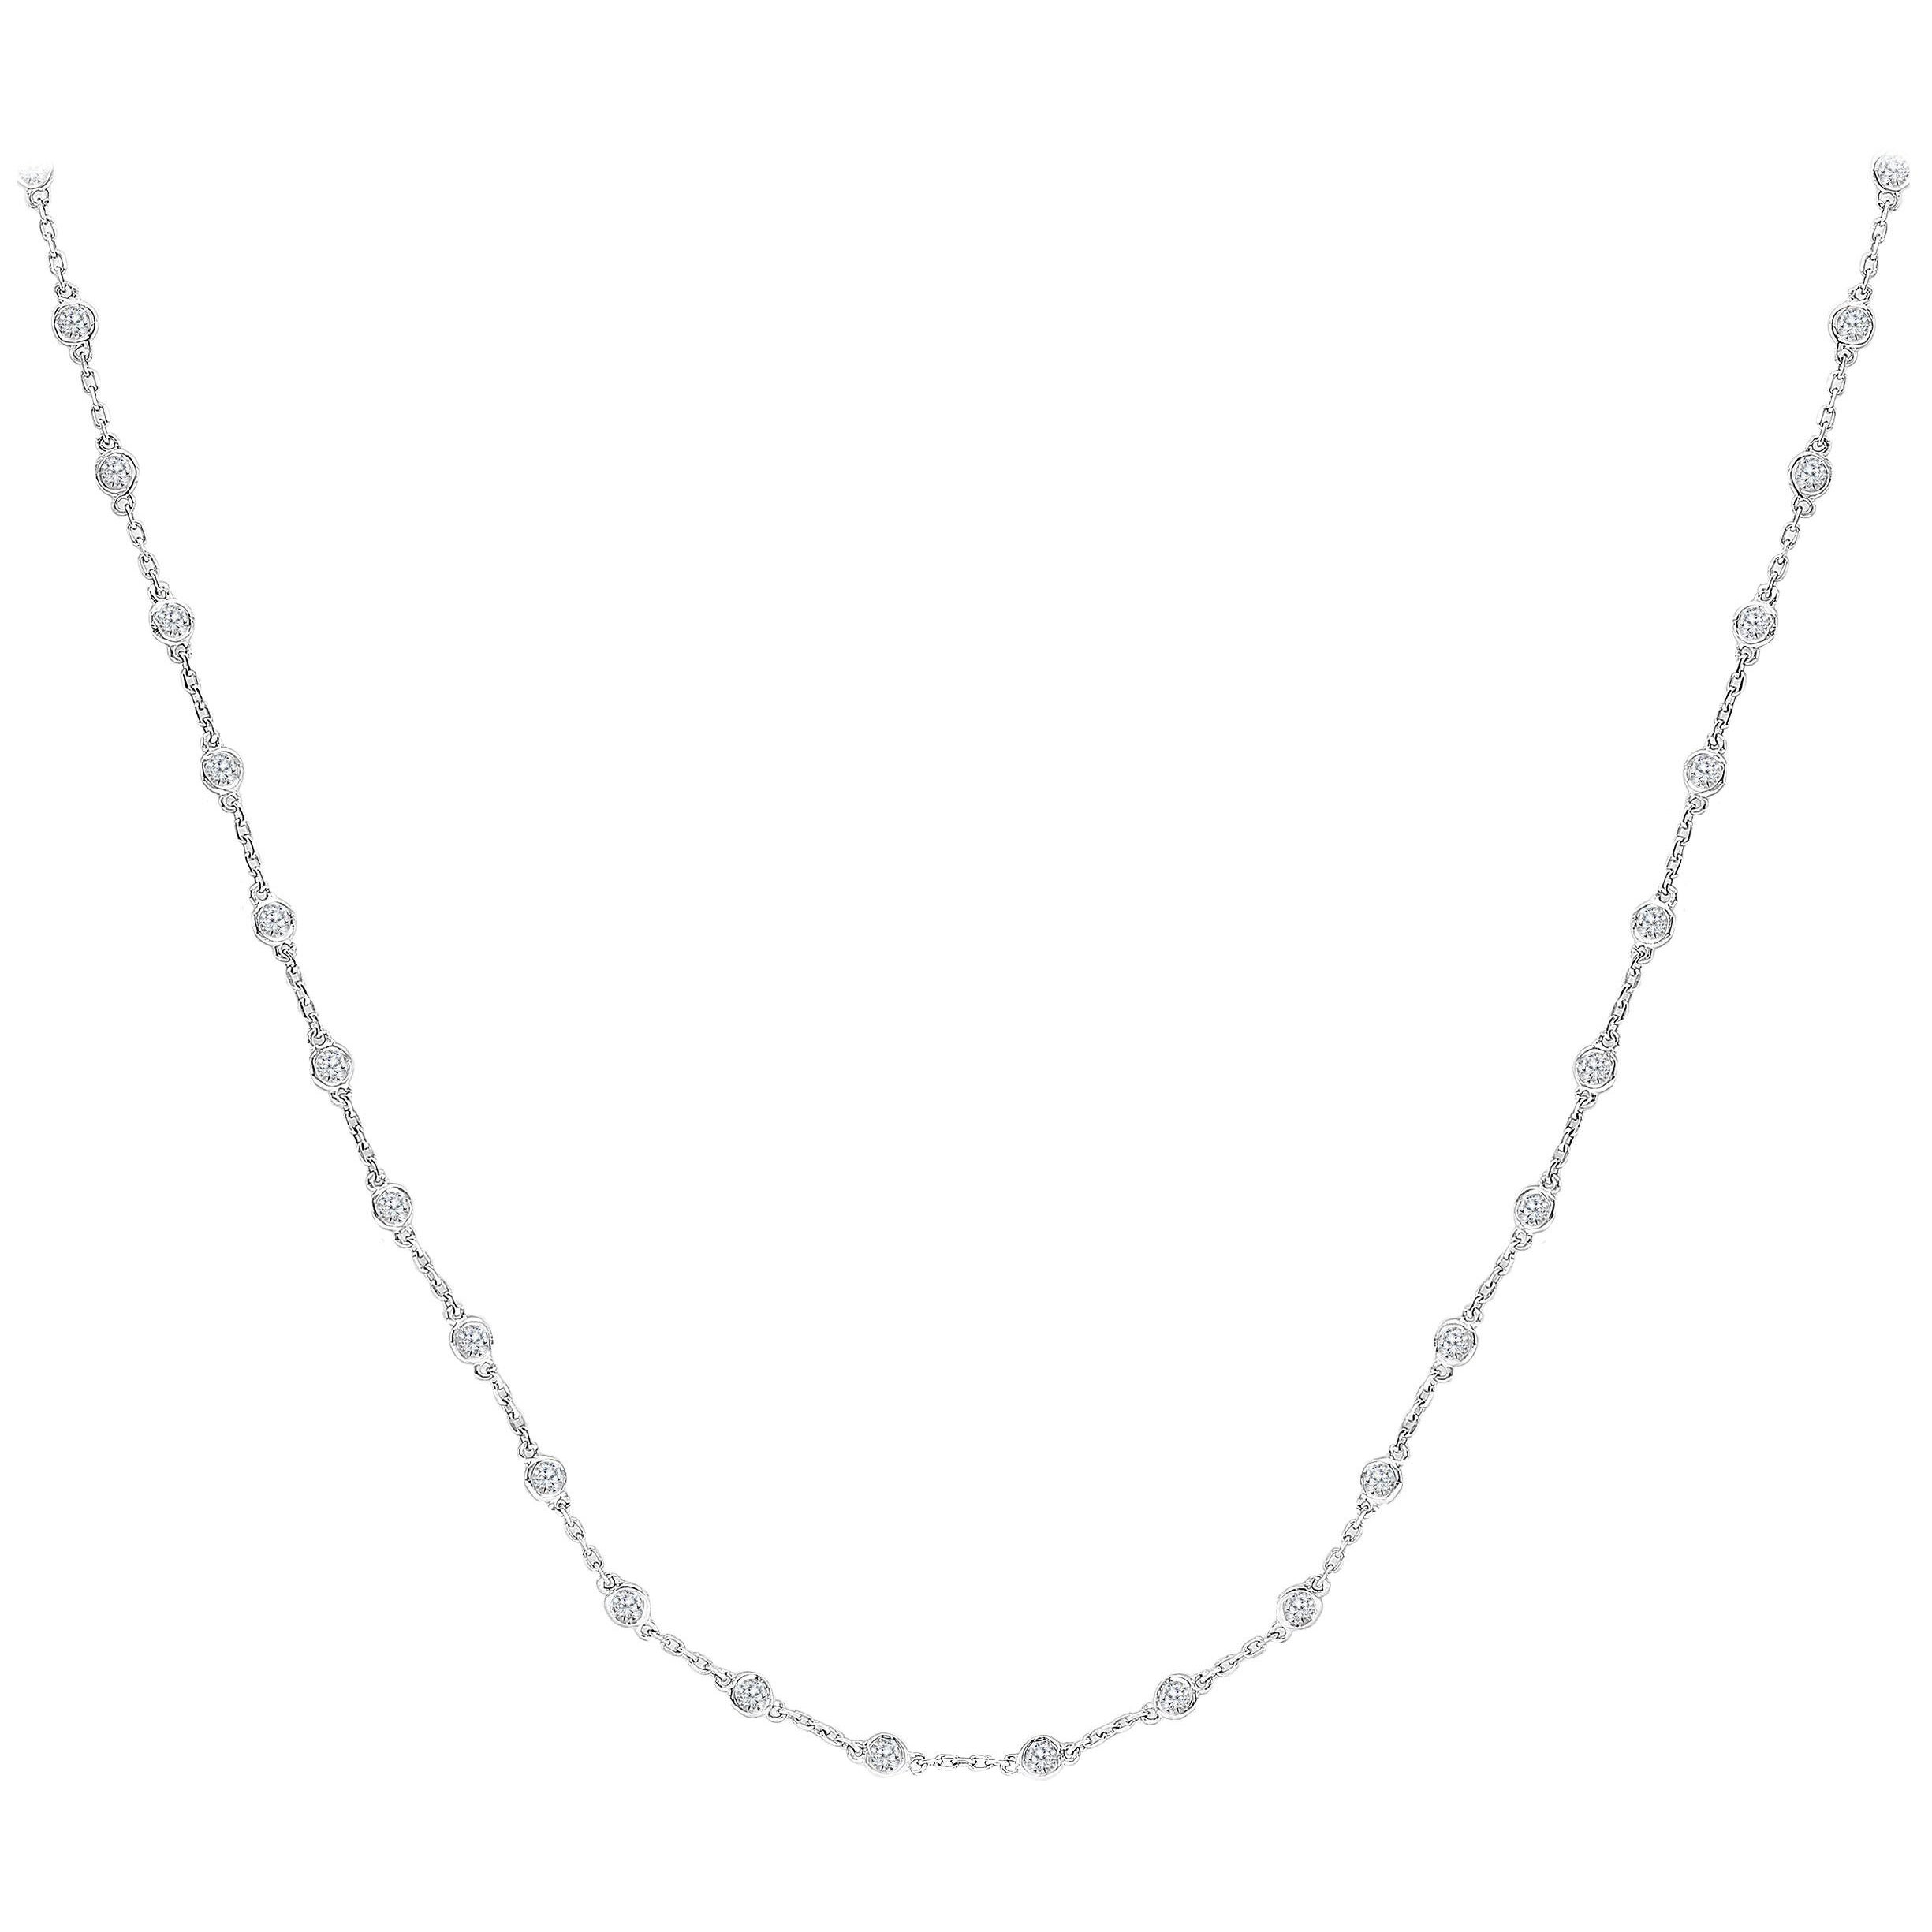 3.33 Carat Diamond by the Yard Chain Necklace in 14K White Gold